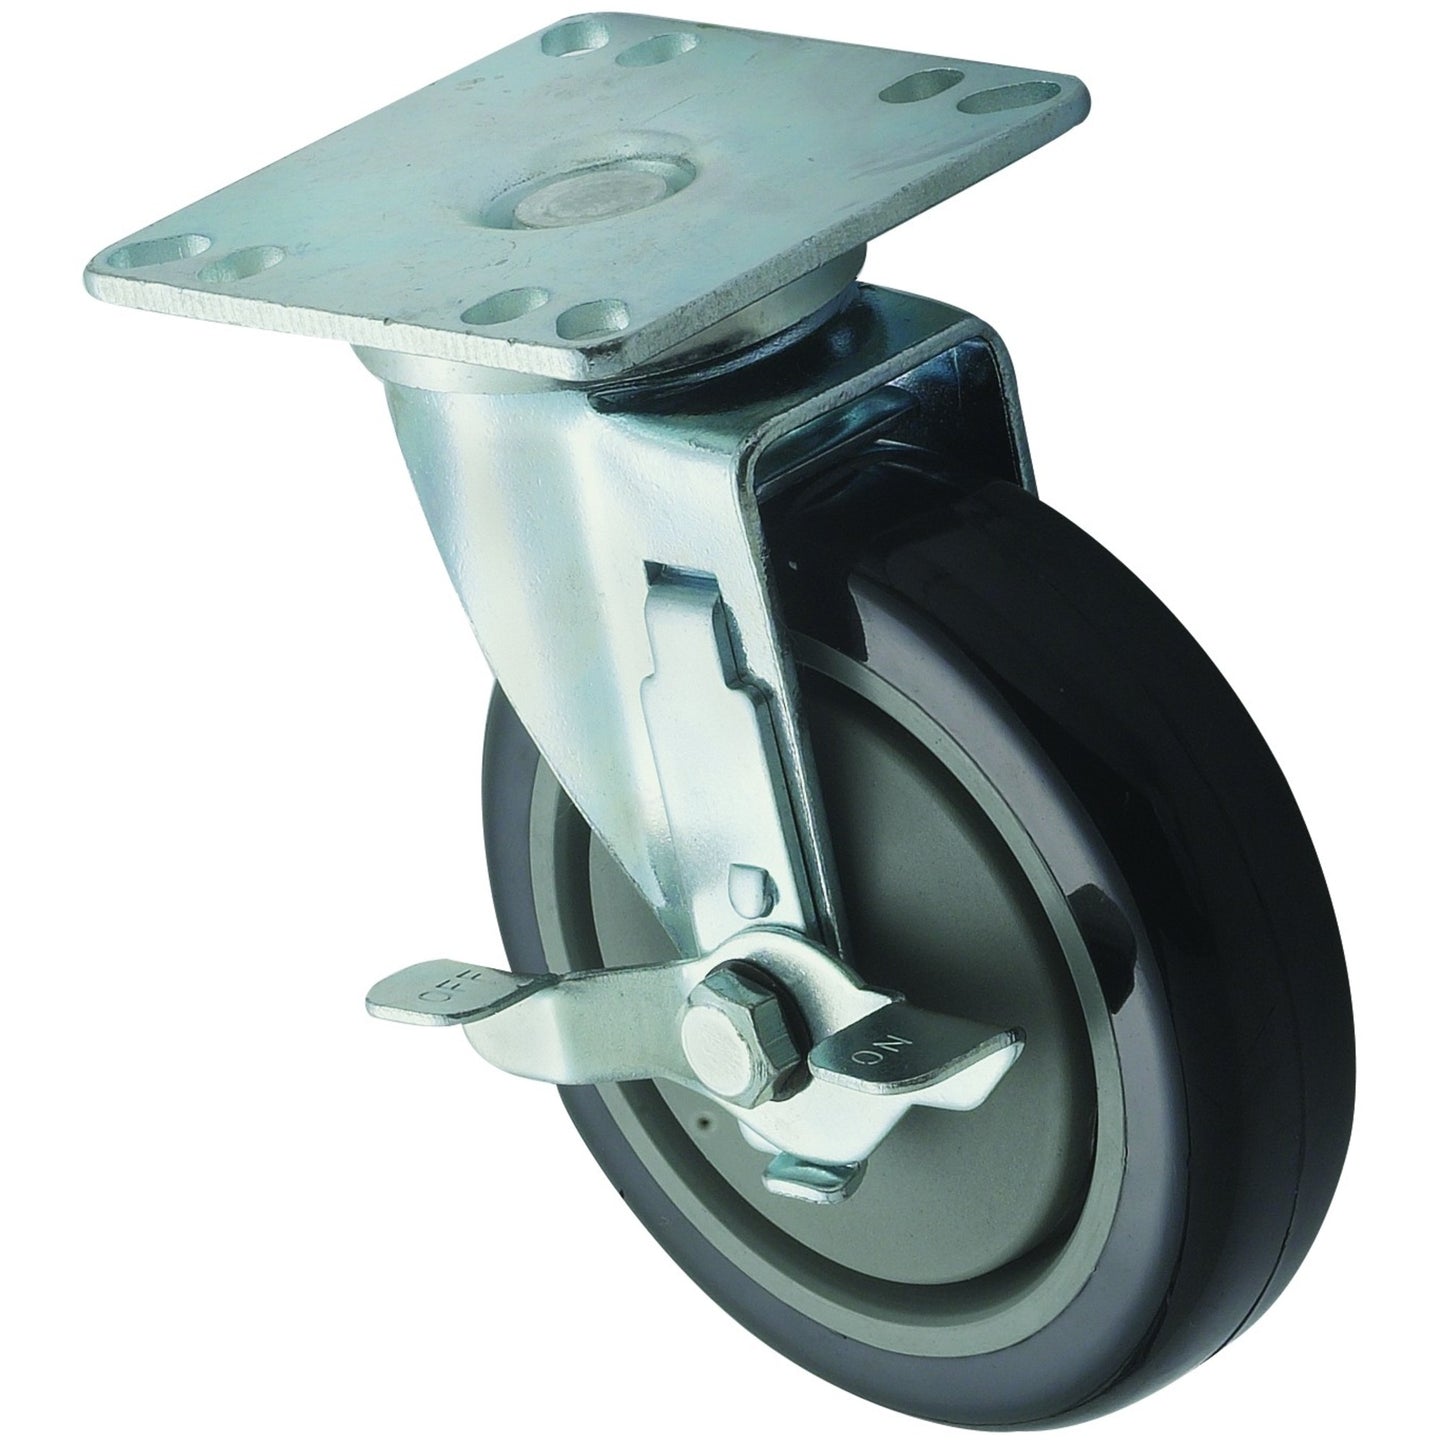 CT-33B - Universal Caster Set with Brake, 3-1/2" Square Plate, 5" Wheels